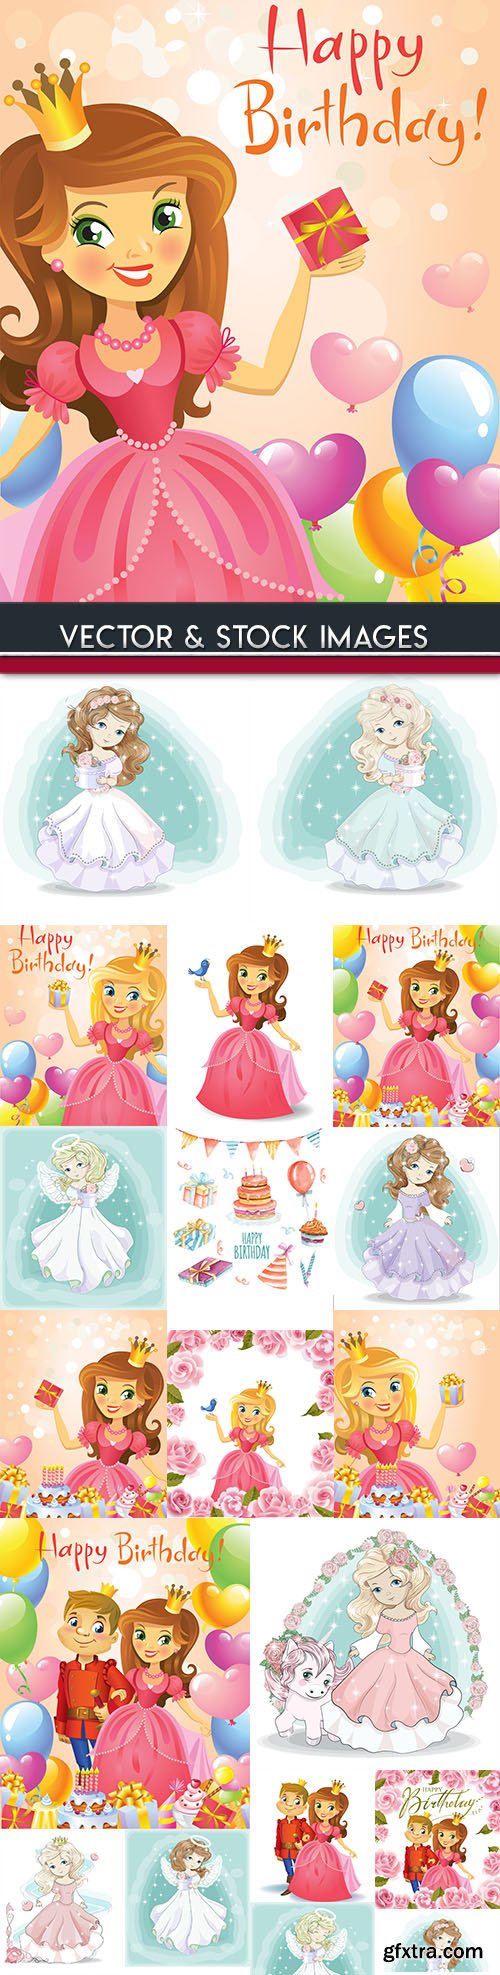 Fabulous princess with flowers for birthday illustration